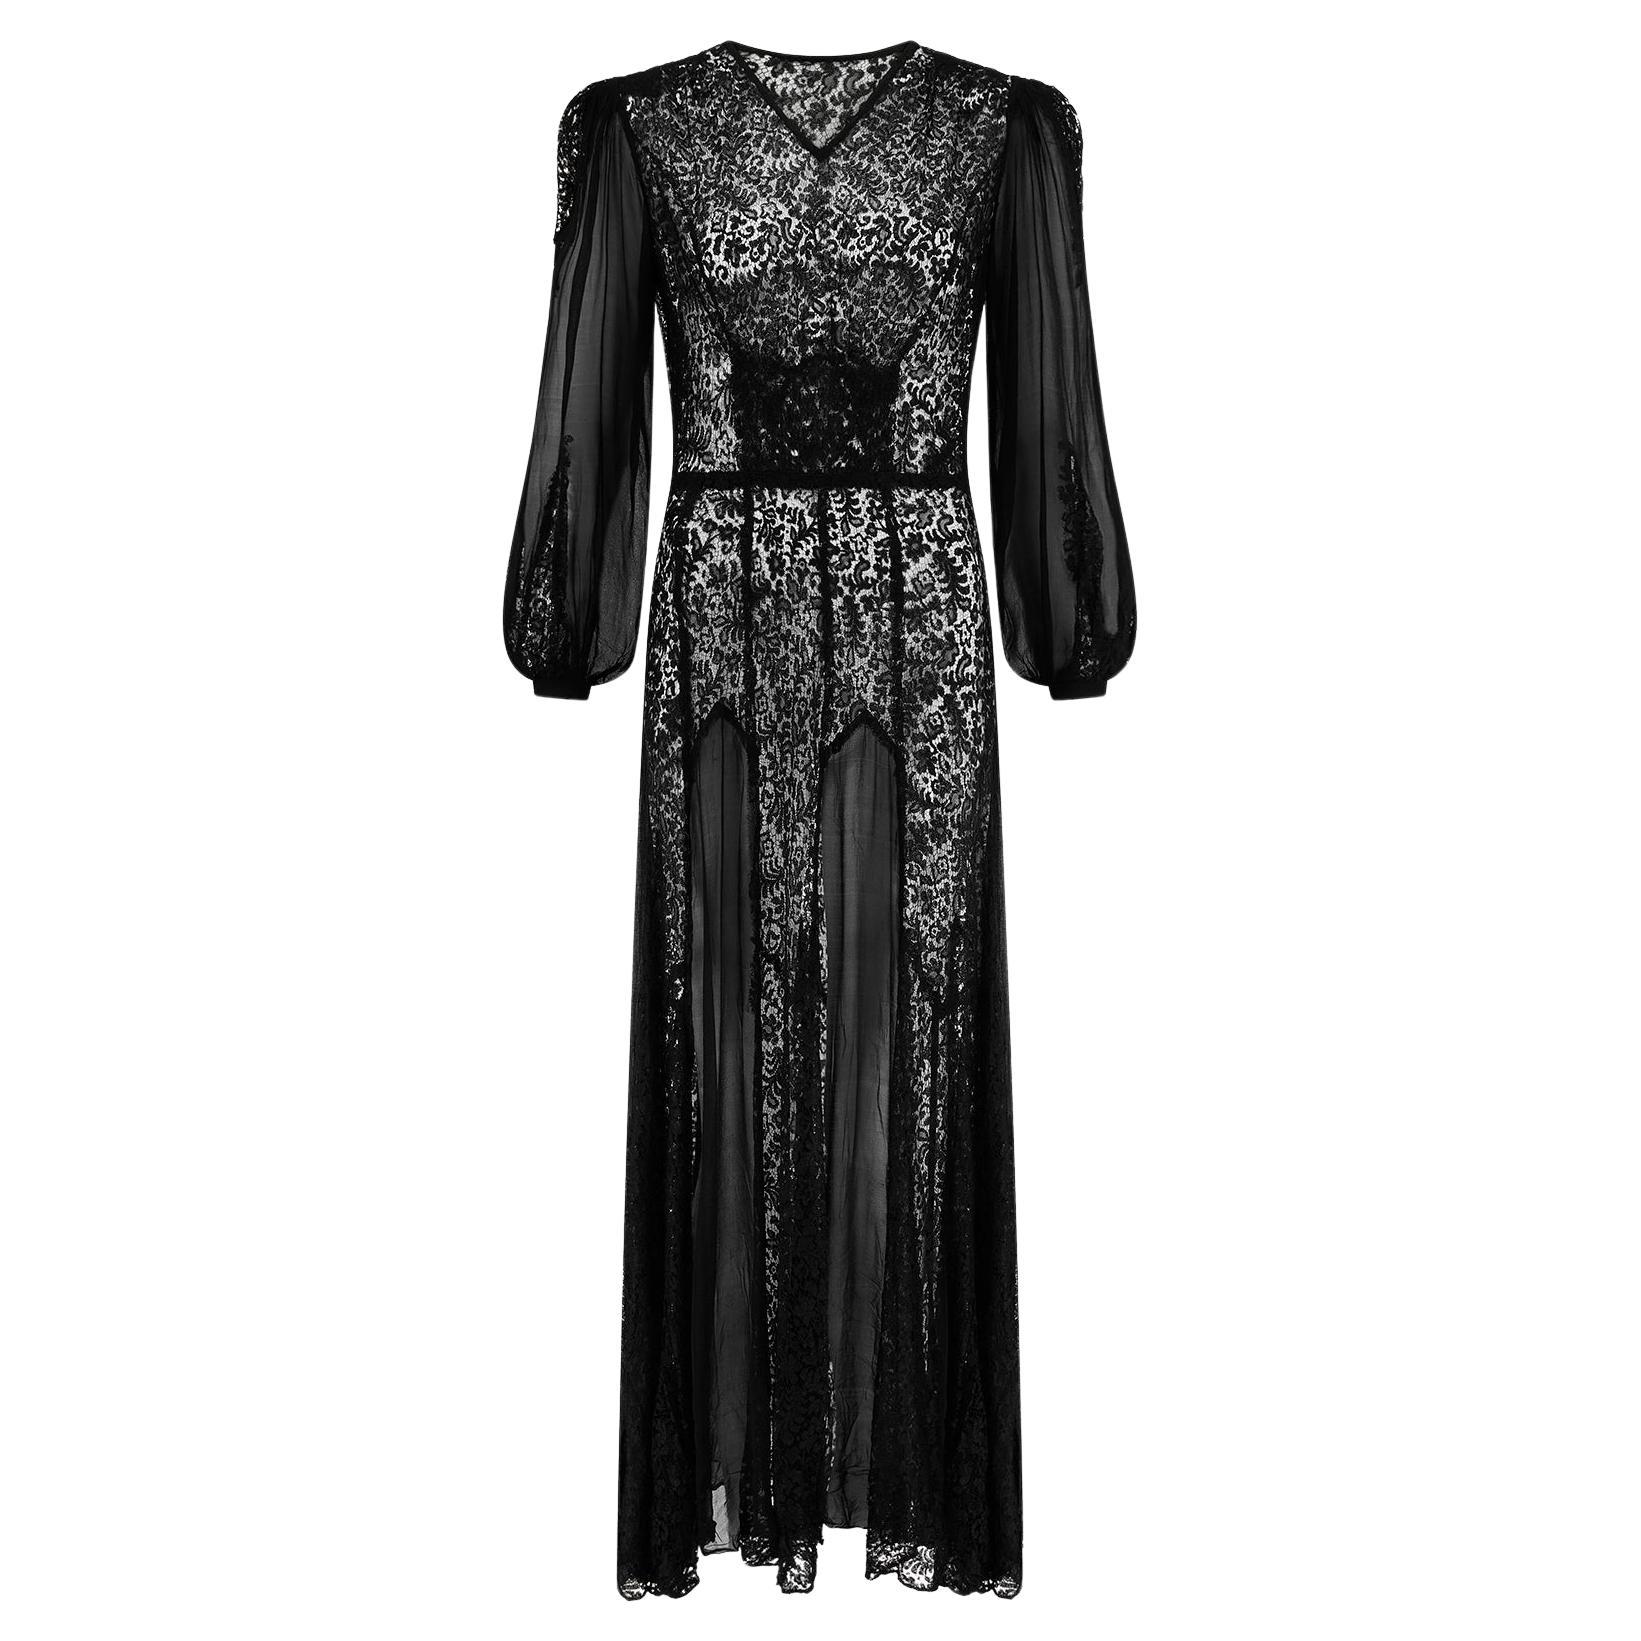 1930s Black Lace and Chiffon Insert Dress For Sale